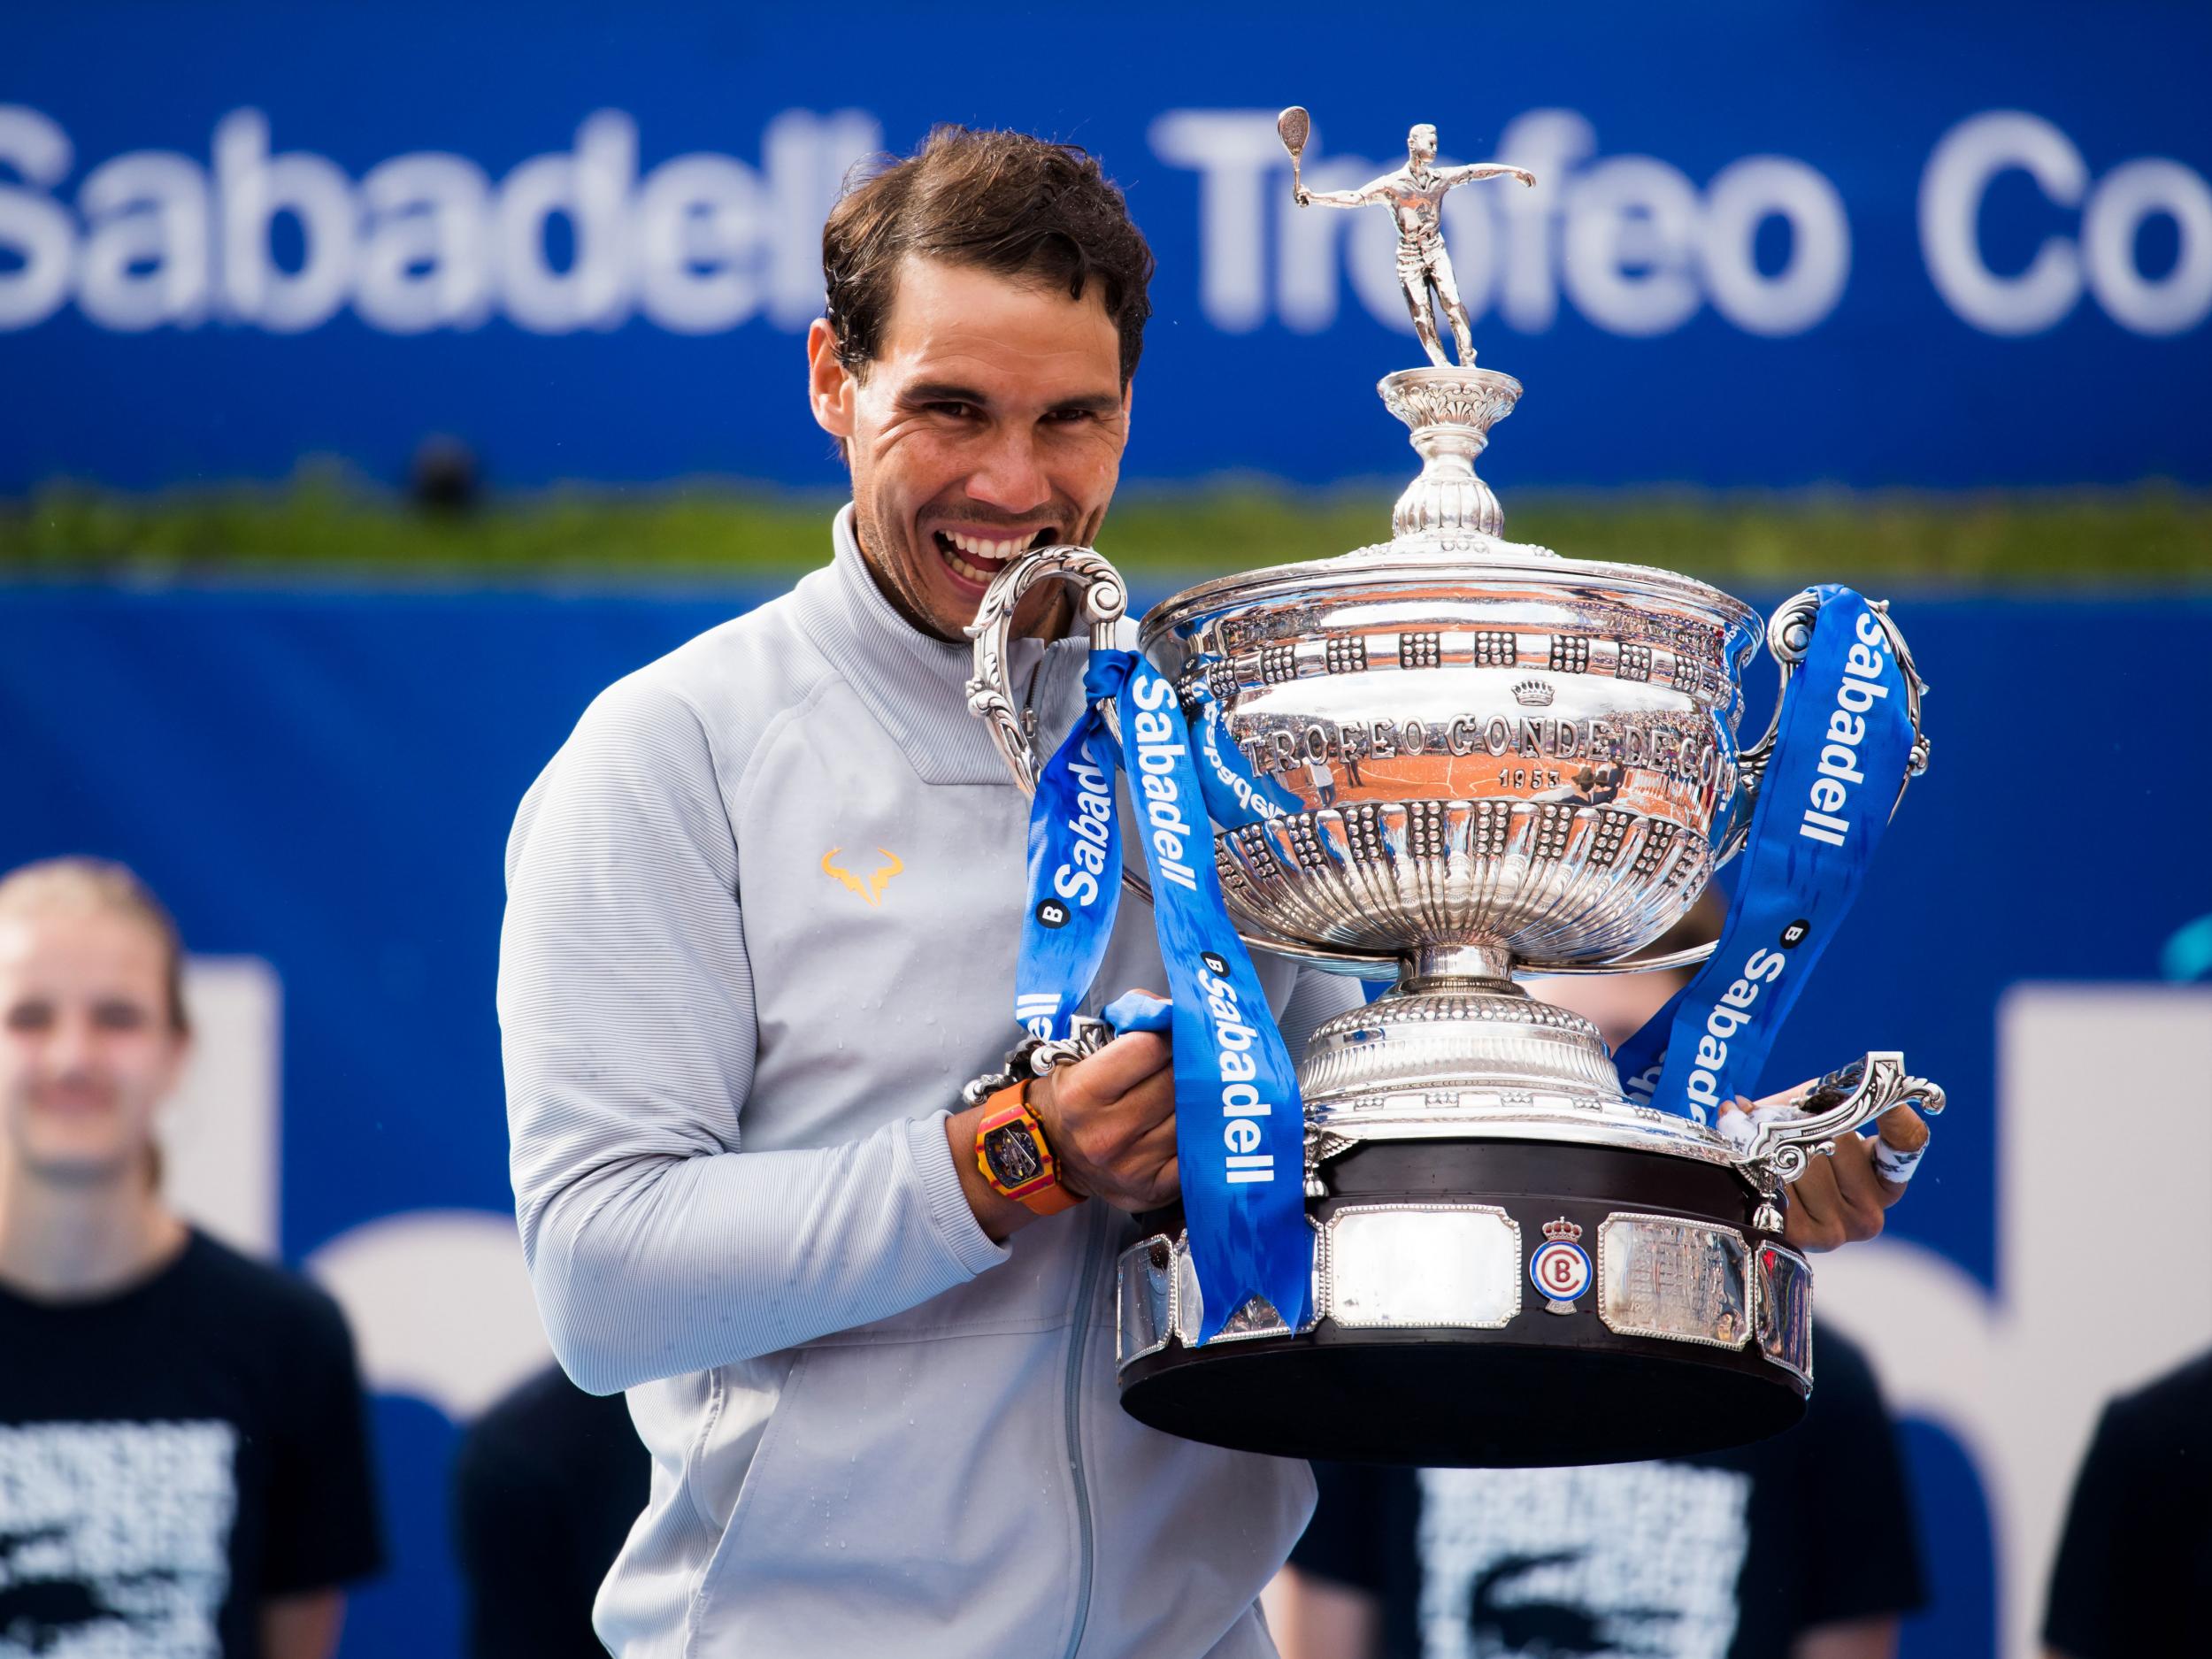 The Spaniard saw off the Greek to win this tournament for an 11th time